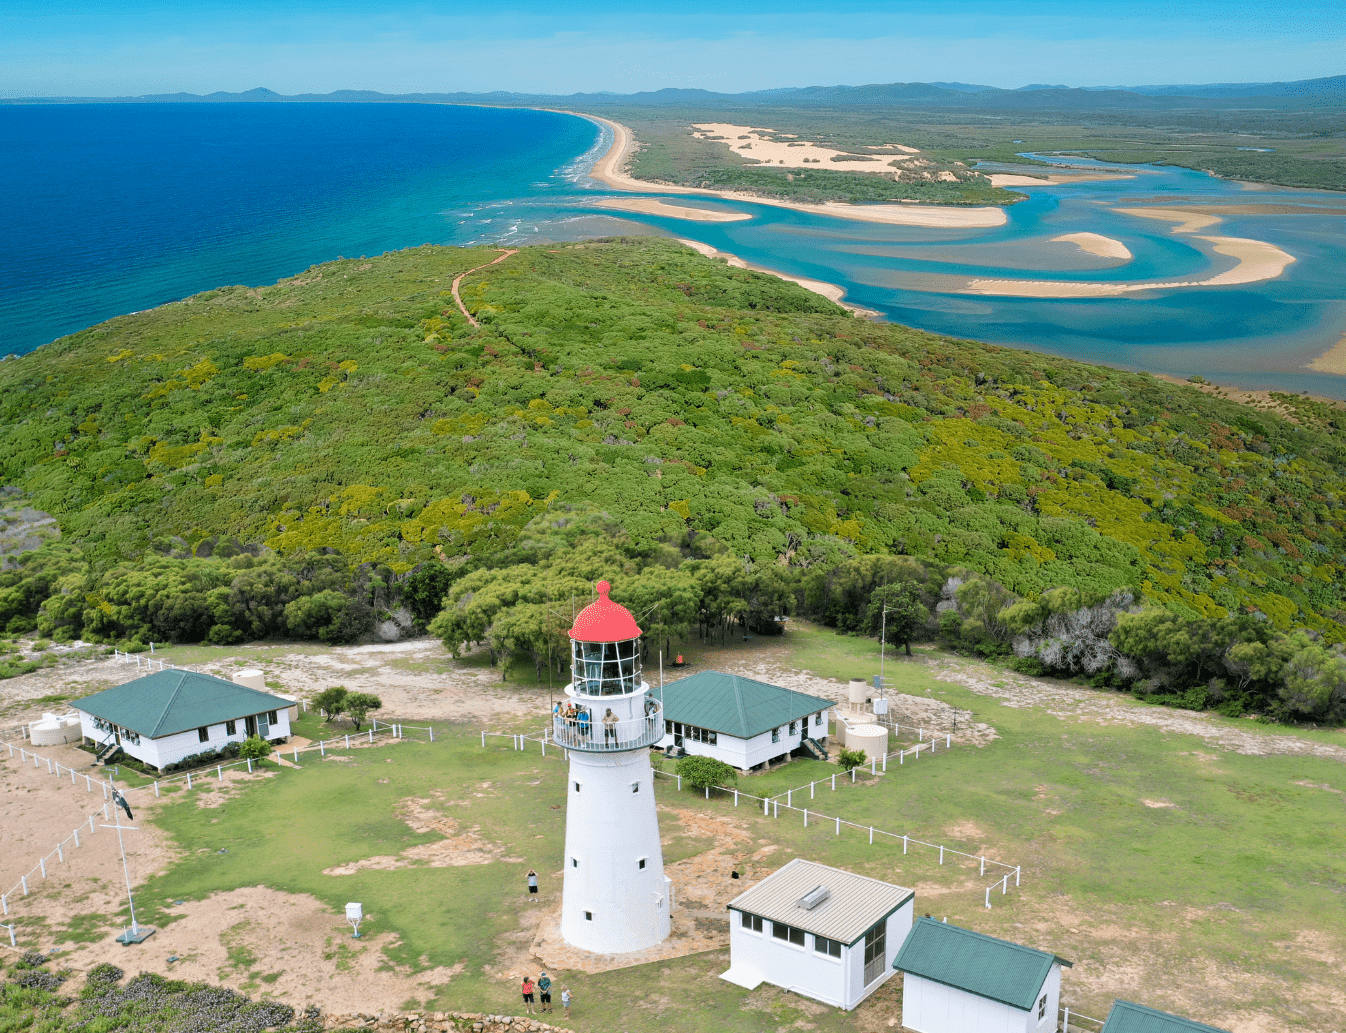 An aerial photo of the bustard head lighthouse station and its background of the native bushland of the headland, with the LARC road running through it. Behind that is crystal blue Jenny Lind creek with sand banks through it.